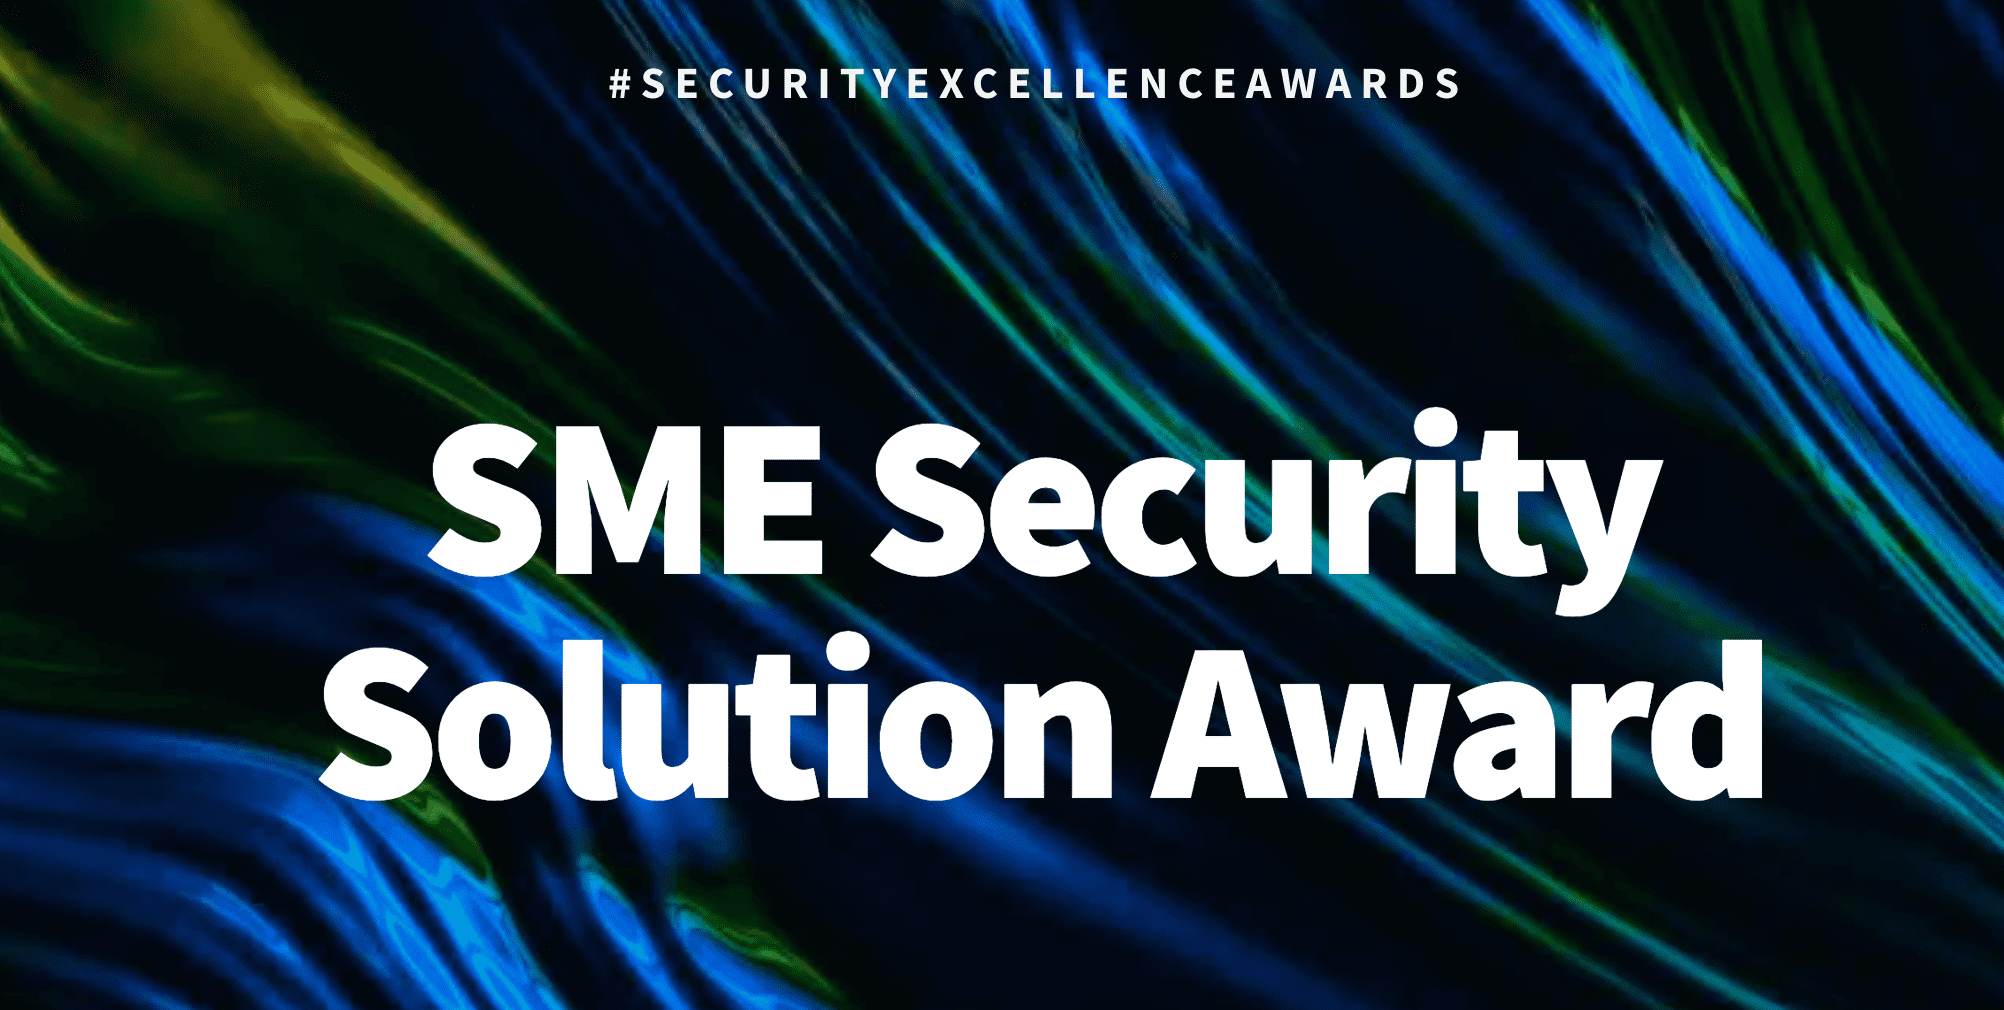 CyberSmart scoops two Security Excellence Awards